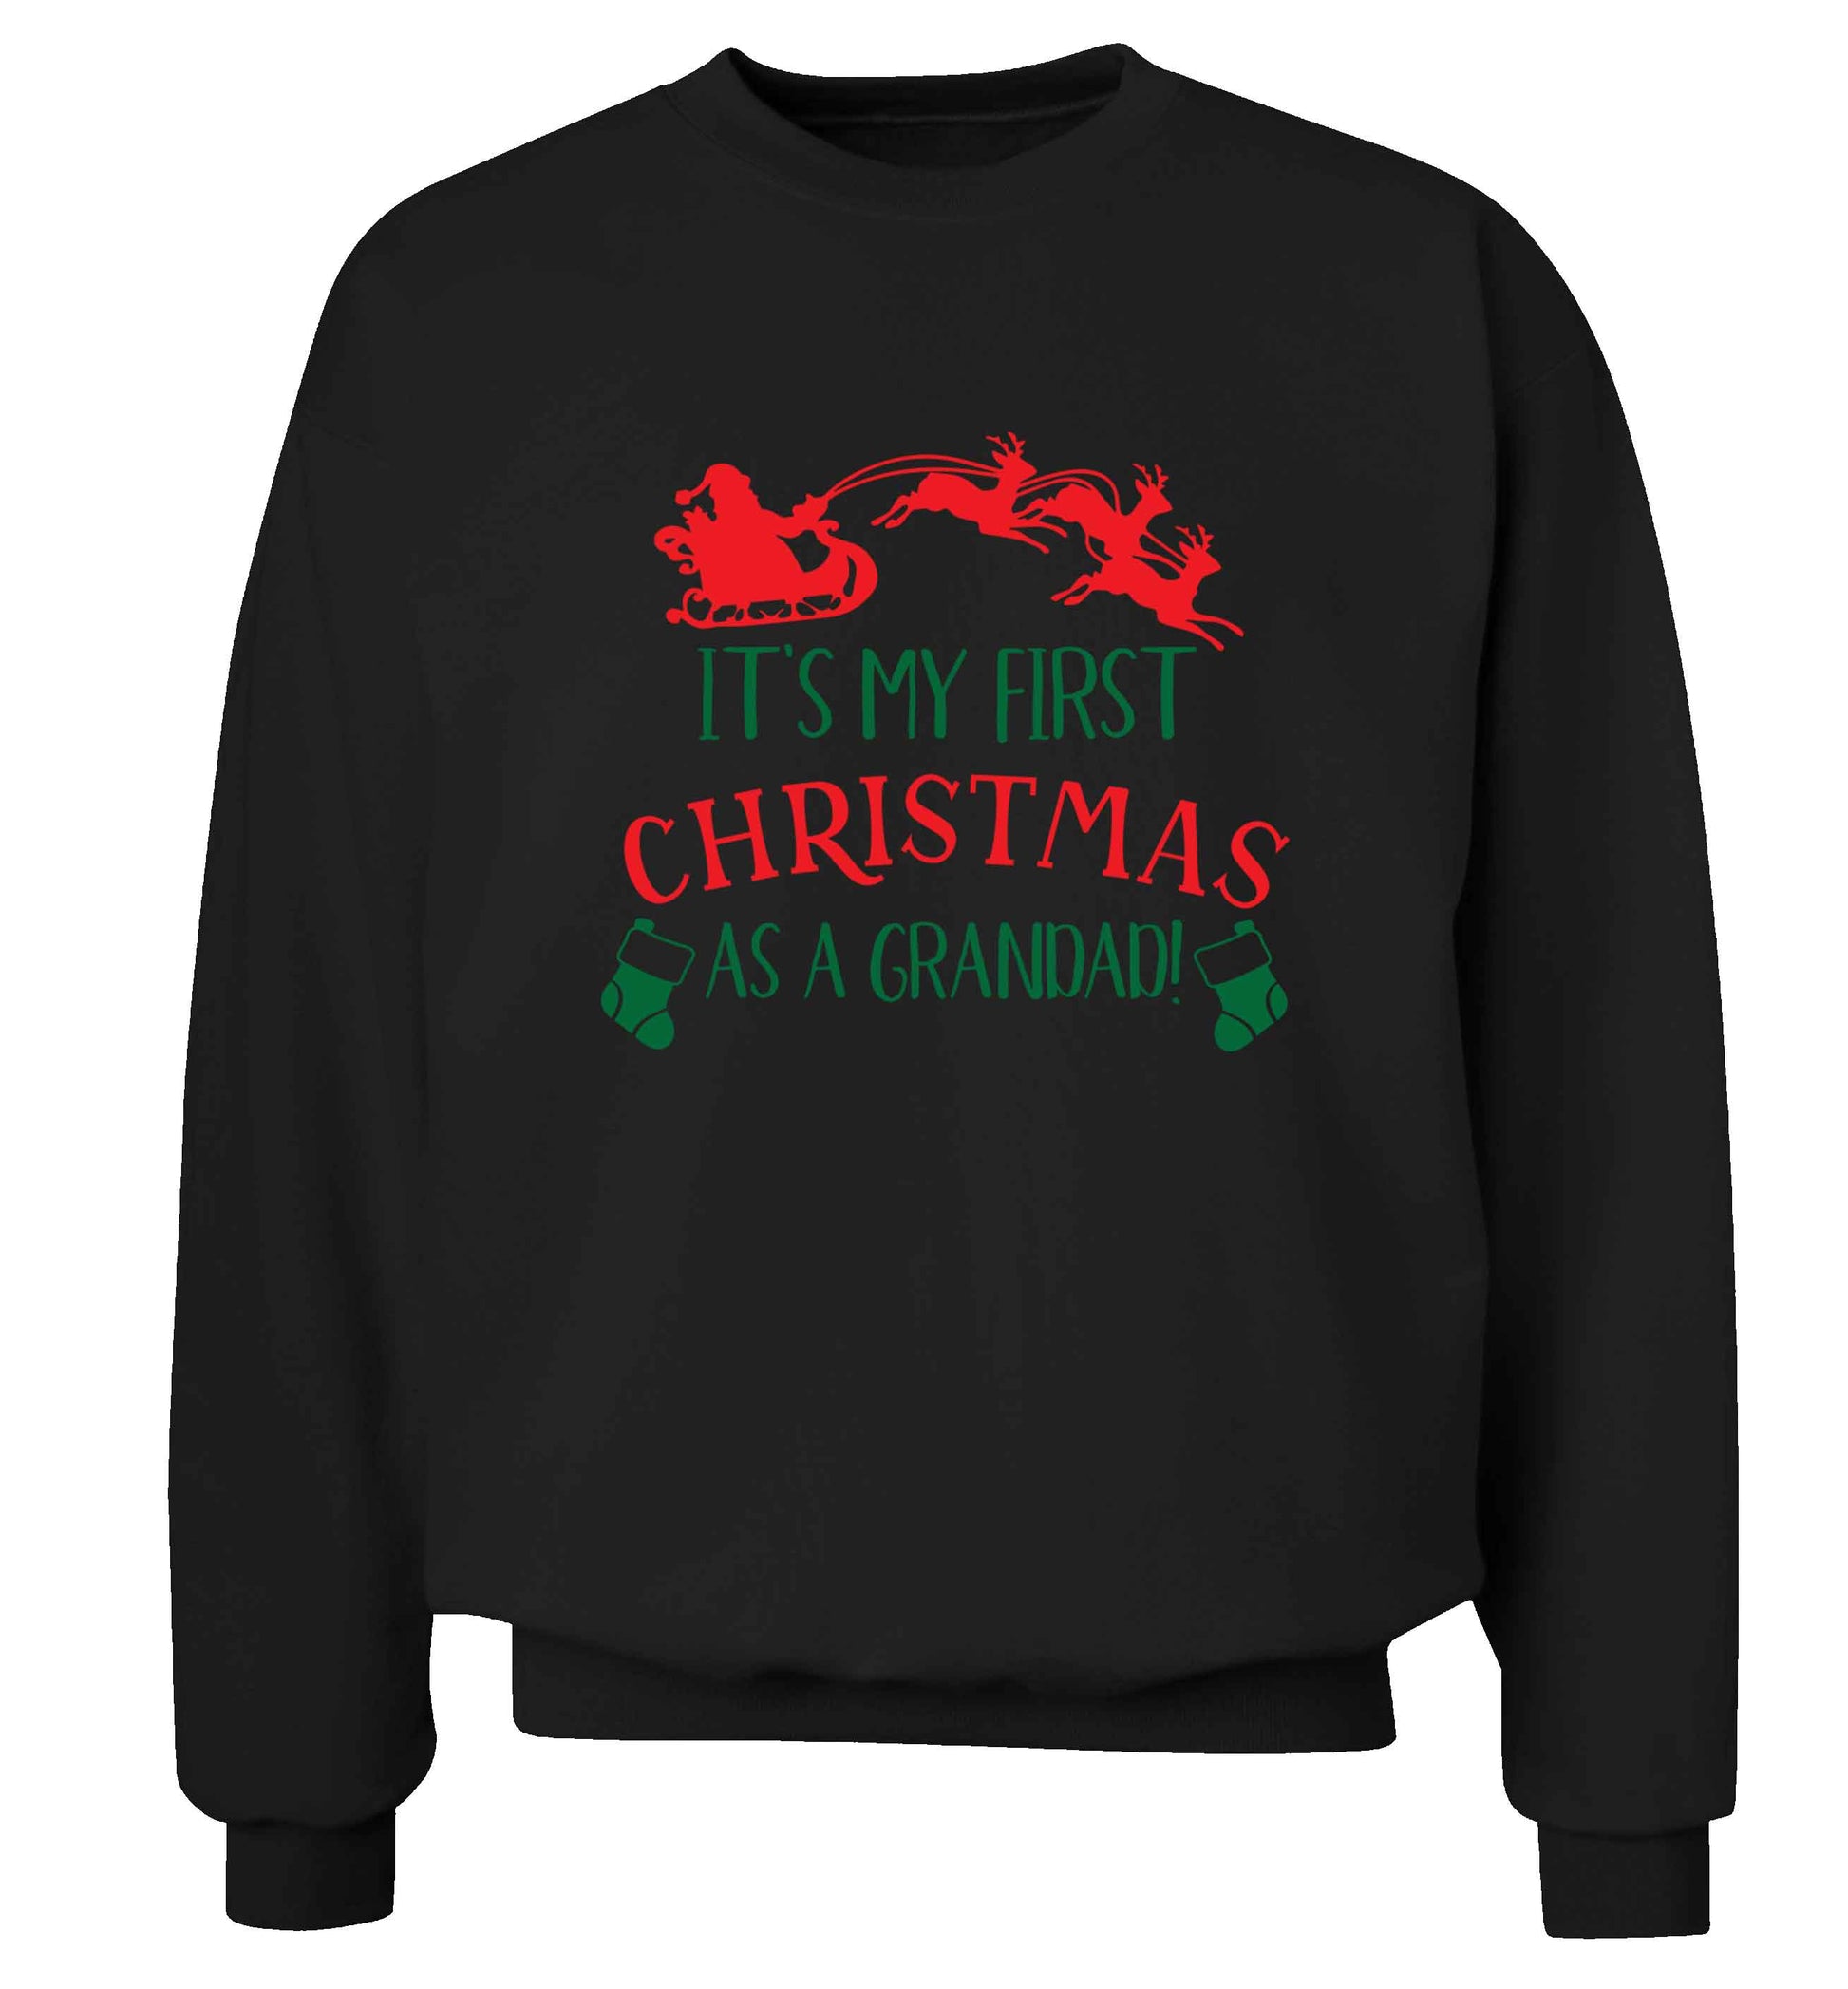 It's my first Christmas as a grandad! Adult's unisex black Sweater 2XL